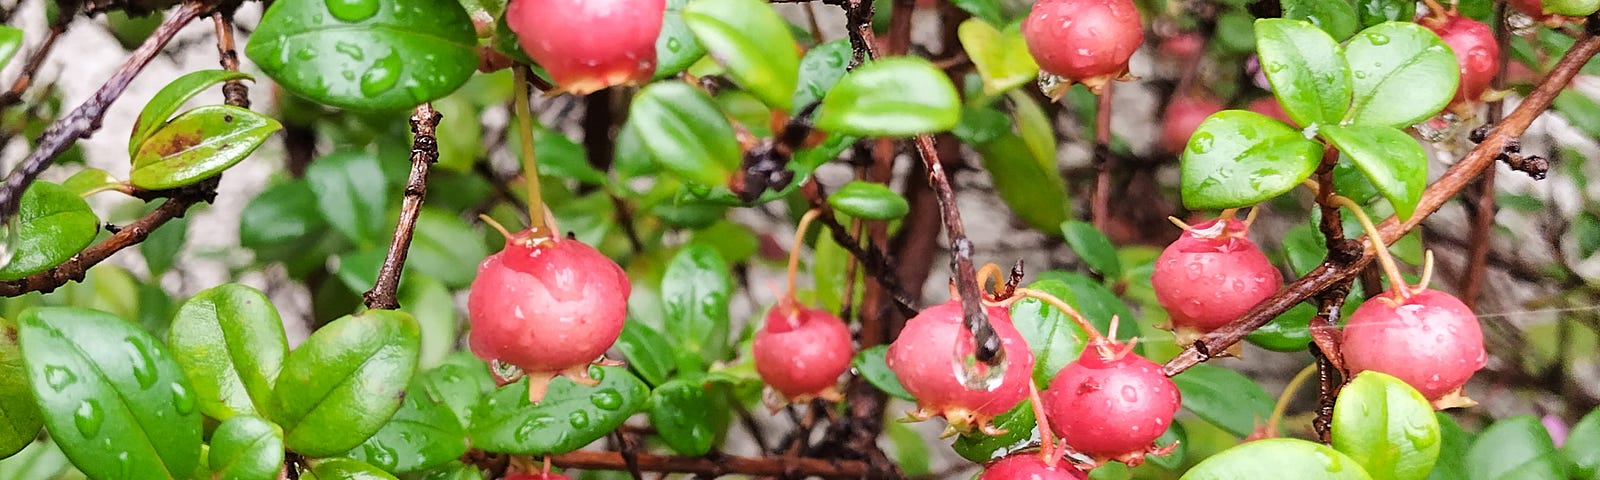 Chilean Guava berries in October, dripping with rain, plump and ready to pick, bright red berries and evergreen leaves.